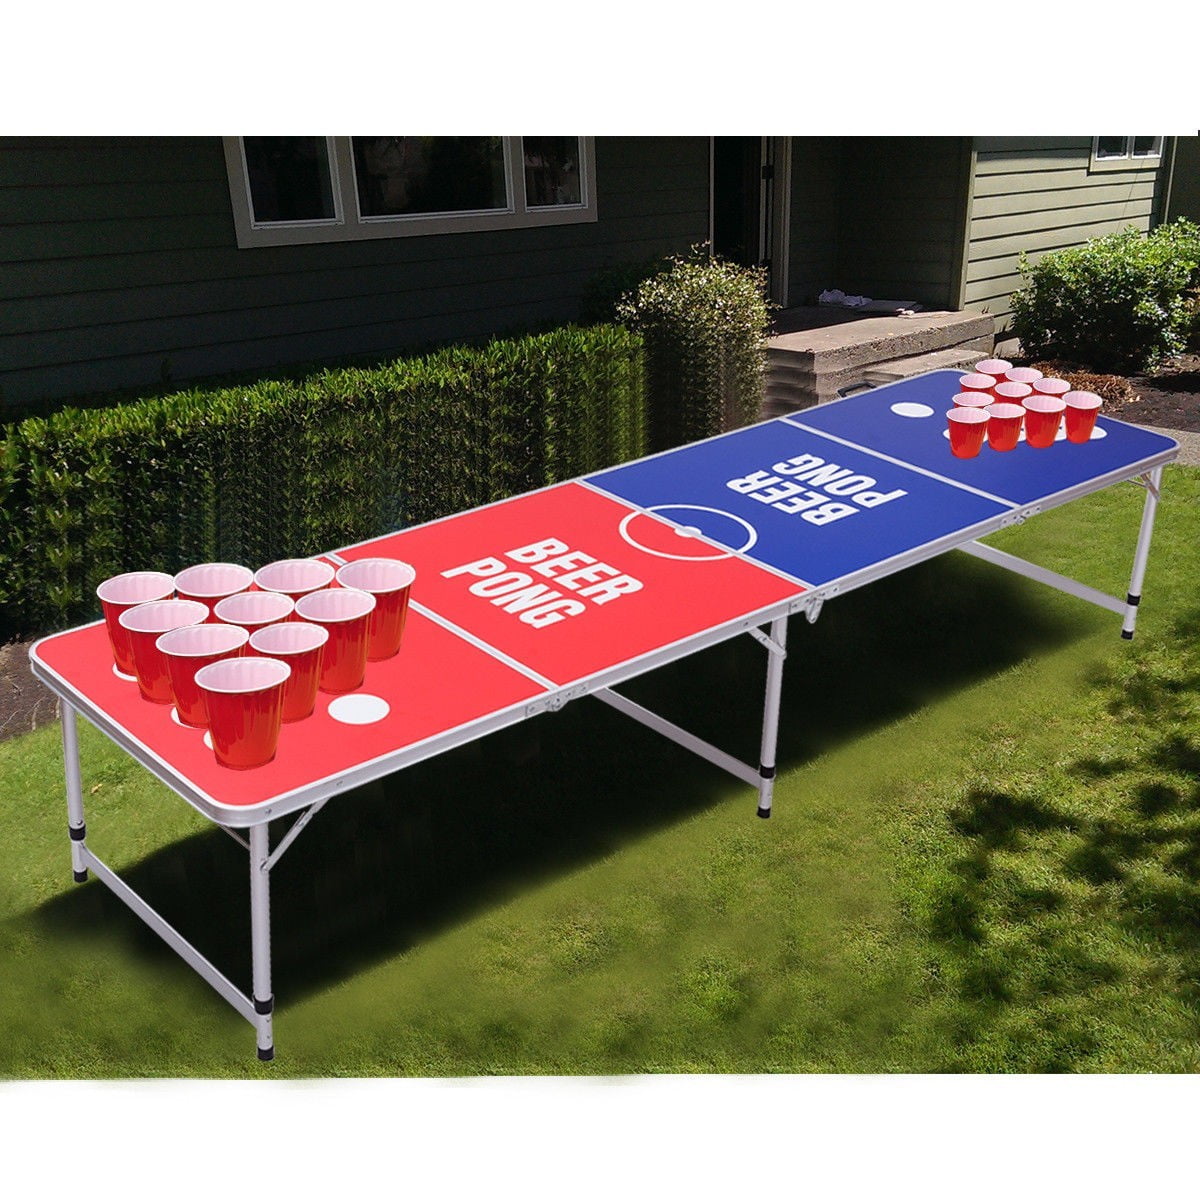 Wido Beer Pong Table Official Size Folding Portable Party Drinking Game 8FT Adults Beerpong